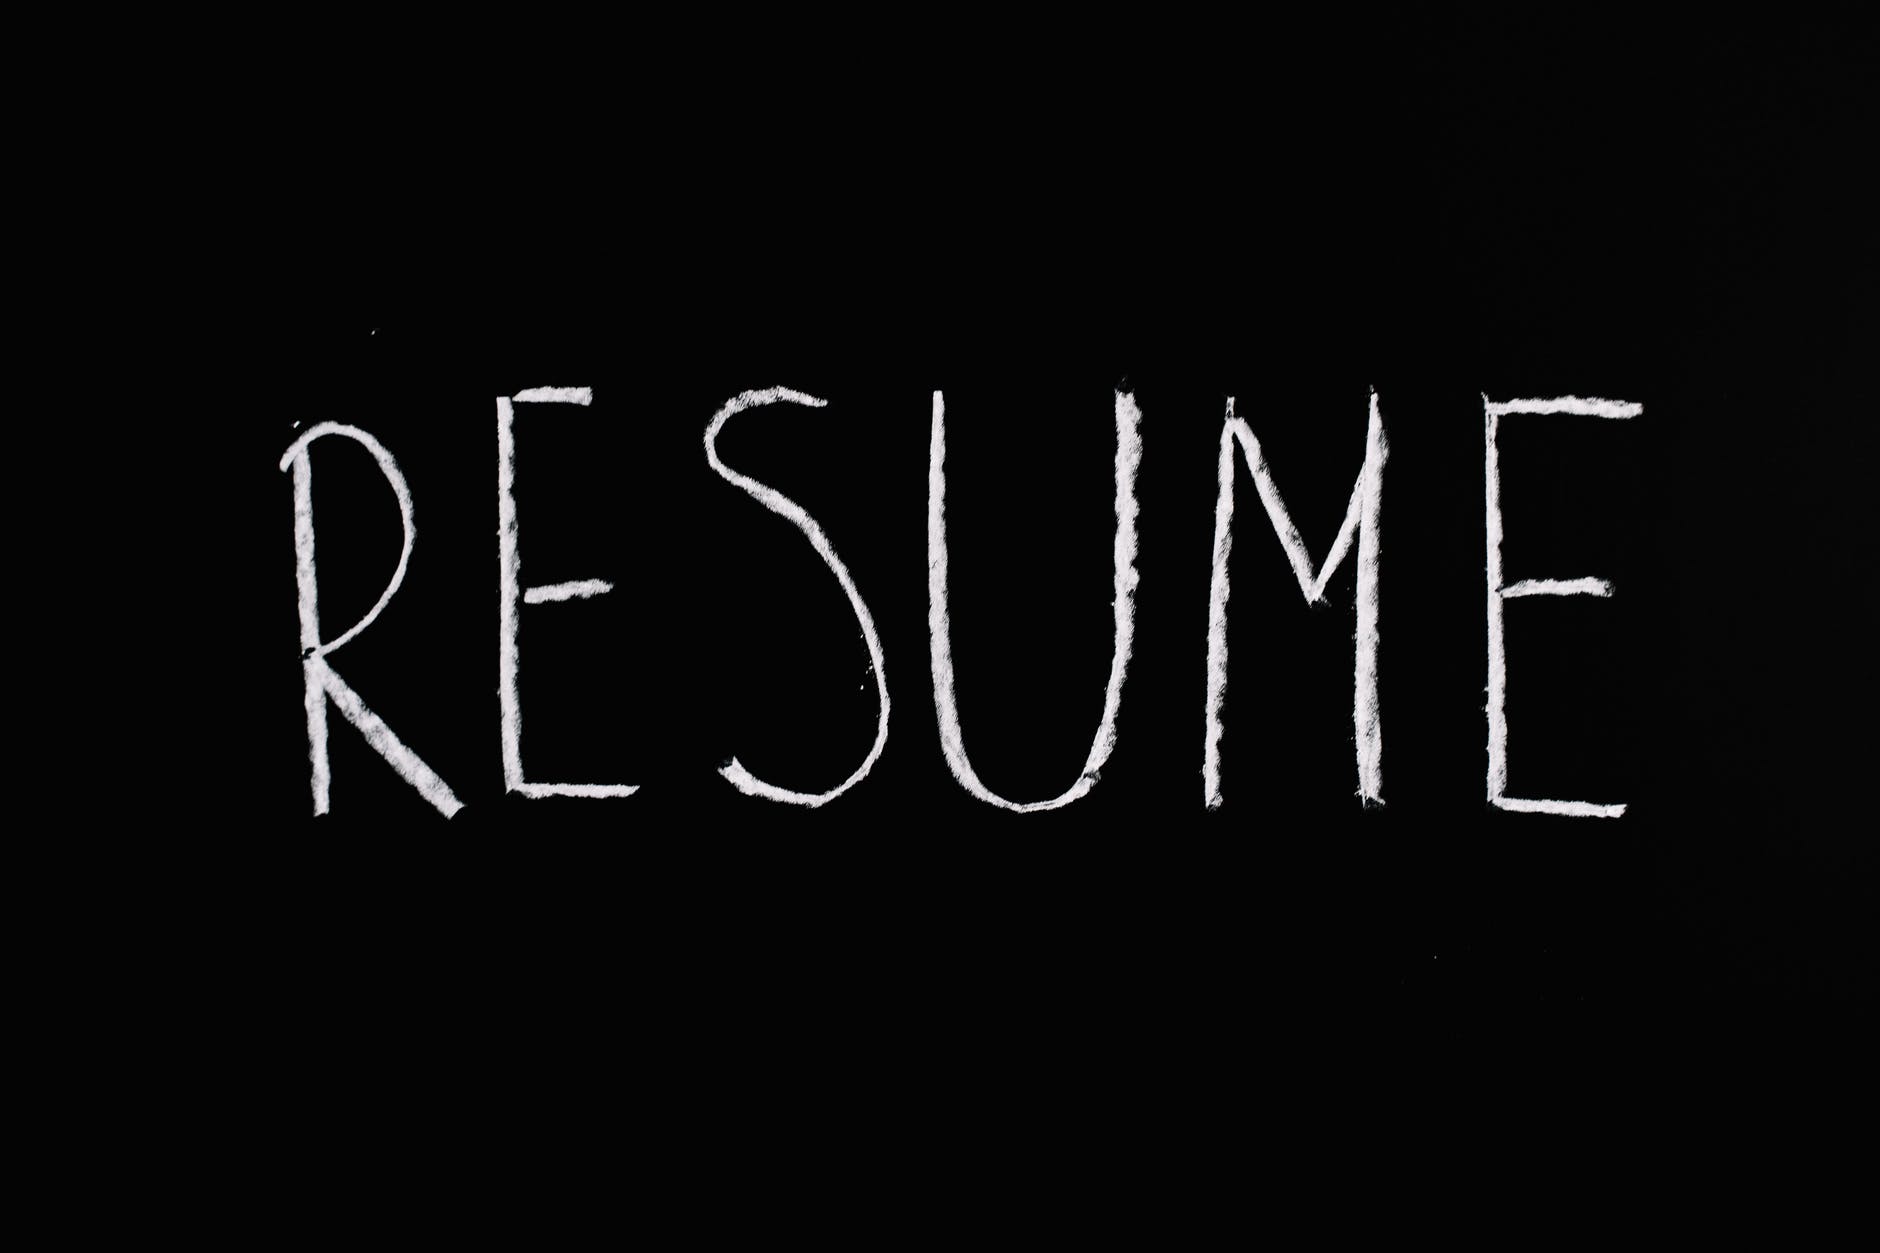 The word 'resume' on a chalk board